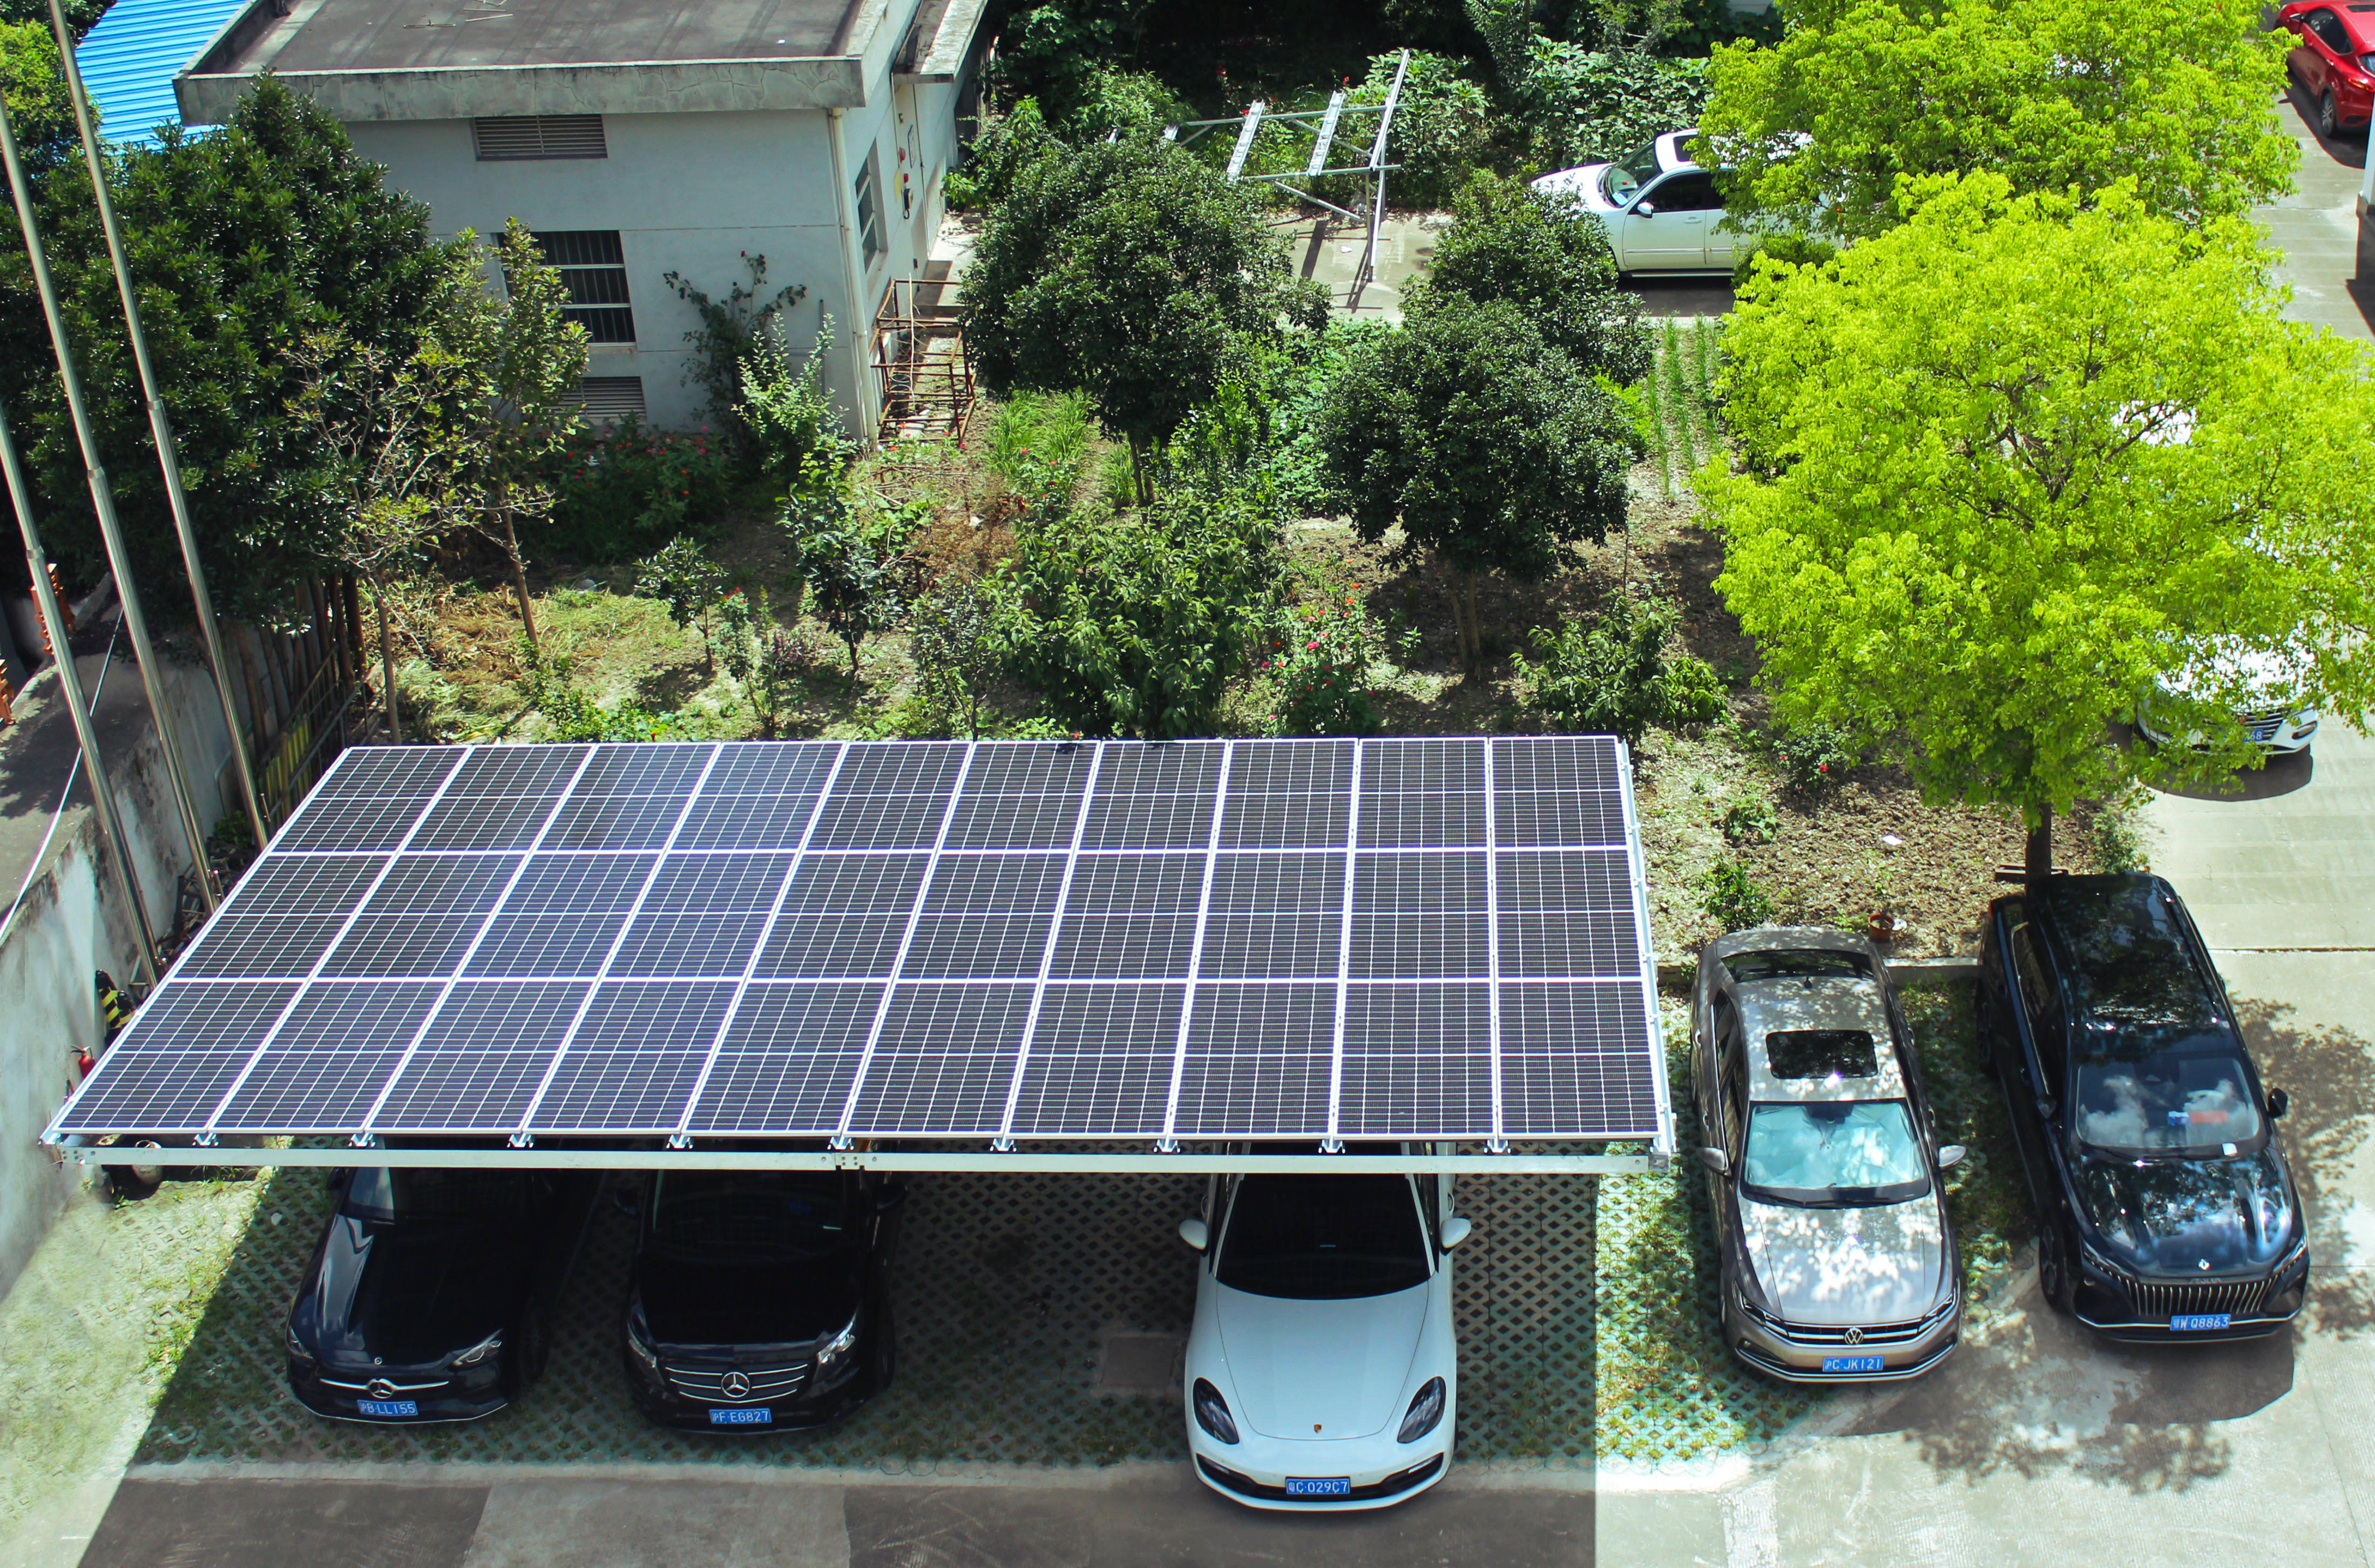 Family carport: protect the vehicle and generate electricity worry-free